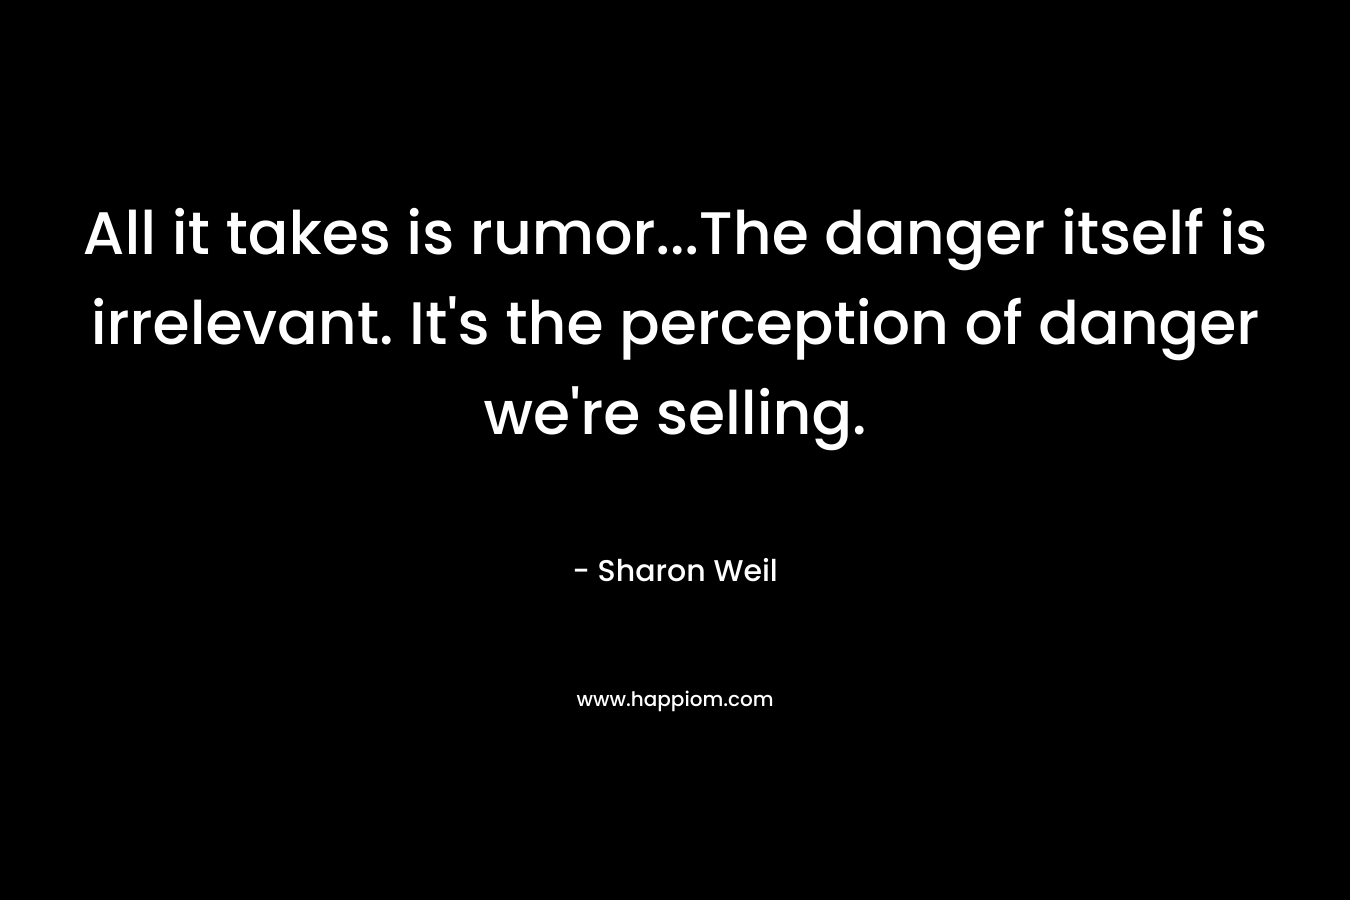 All it takes is rumor…The danger itself is irrelevant. It’s the perception of danger we’re selling. – Sharon Weil